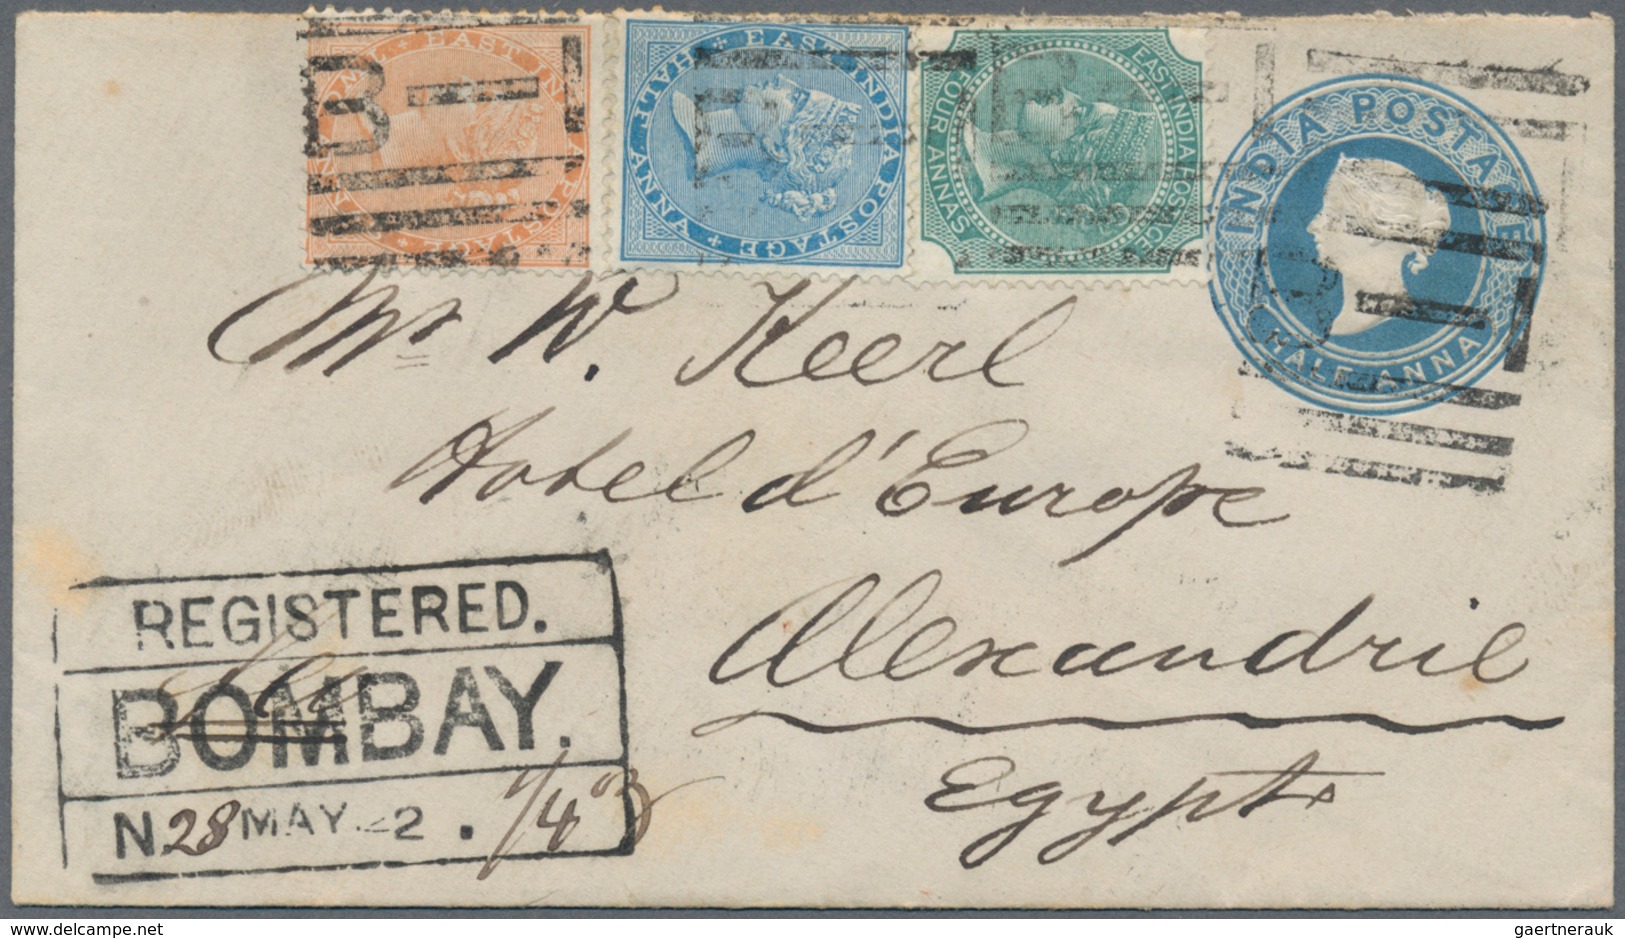 Indien: 1880 Postal Stationery Envelope ½a. Blue Used Registered From Bombay To 'Hotel D'Europe' In - 1852 Provinz Von Sind